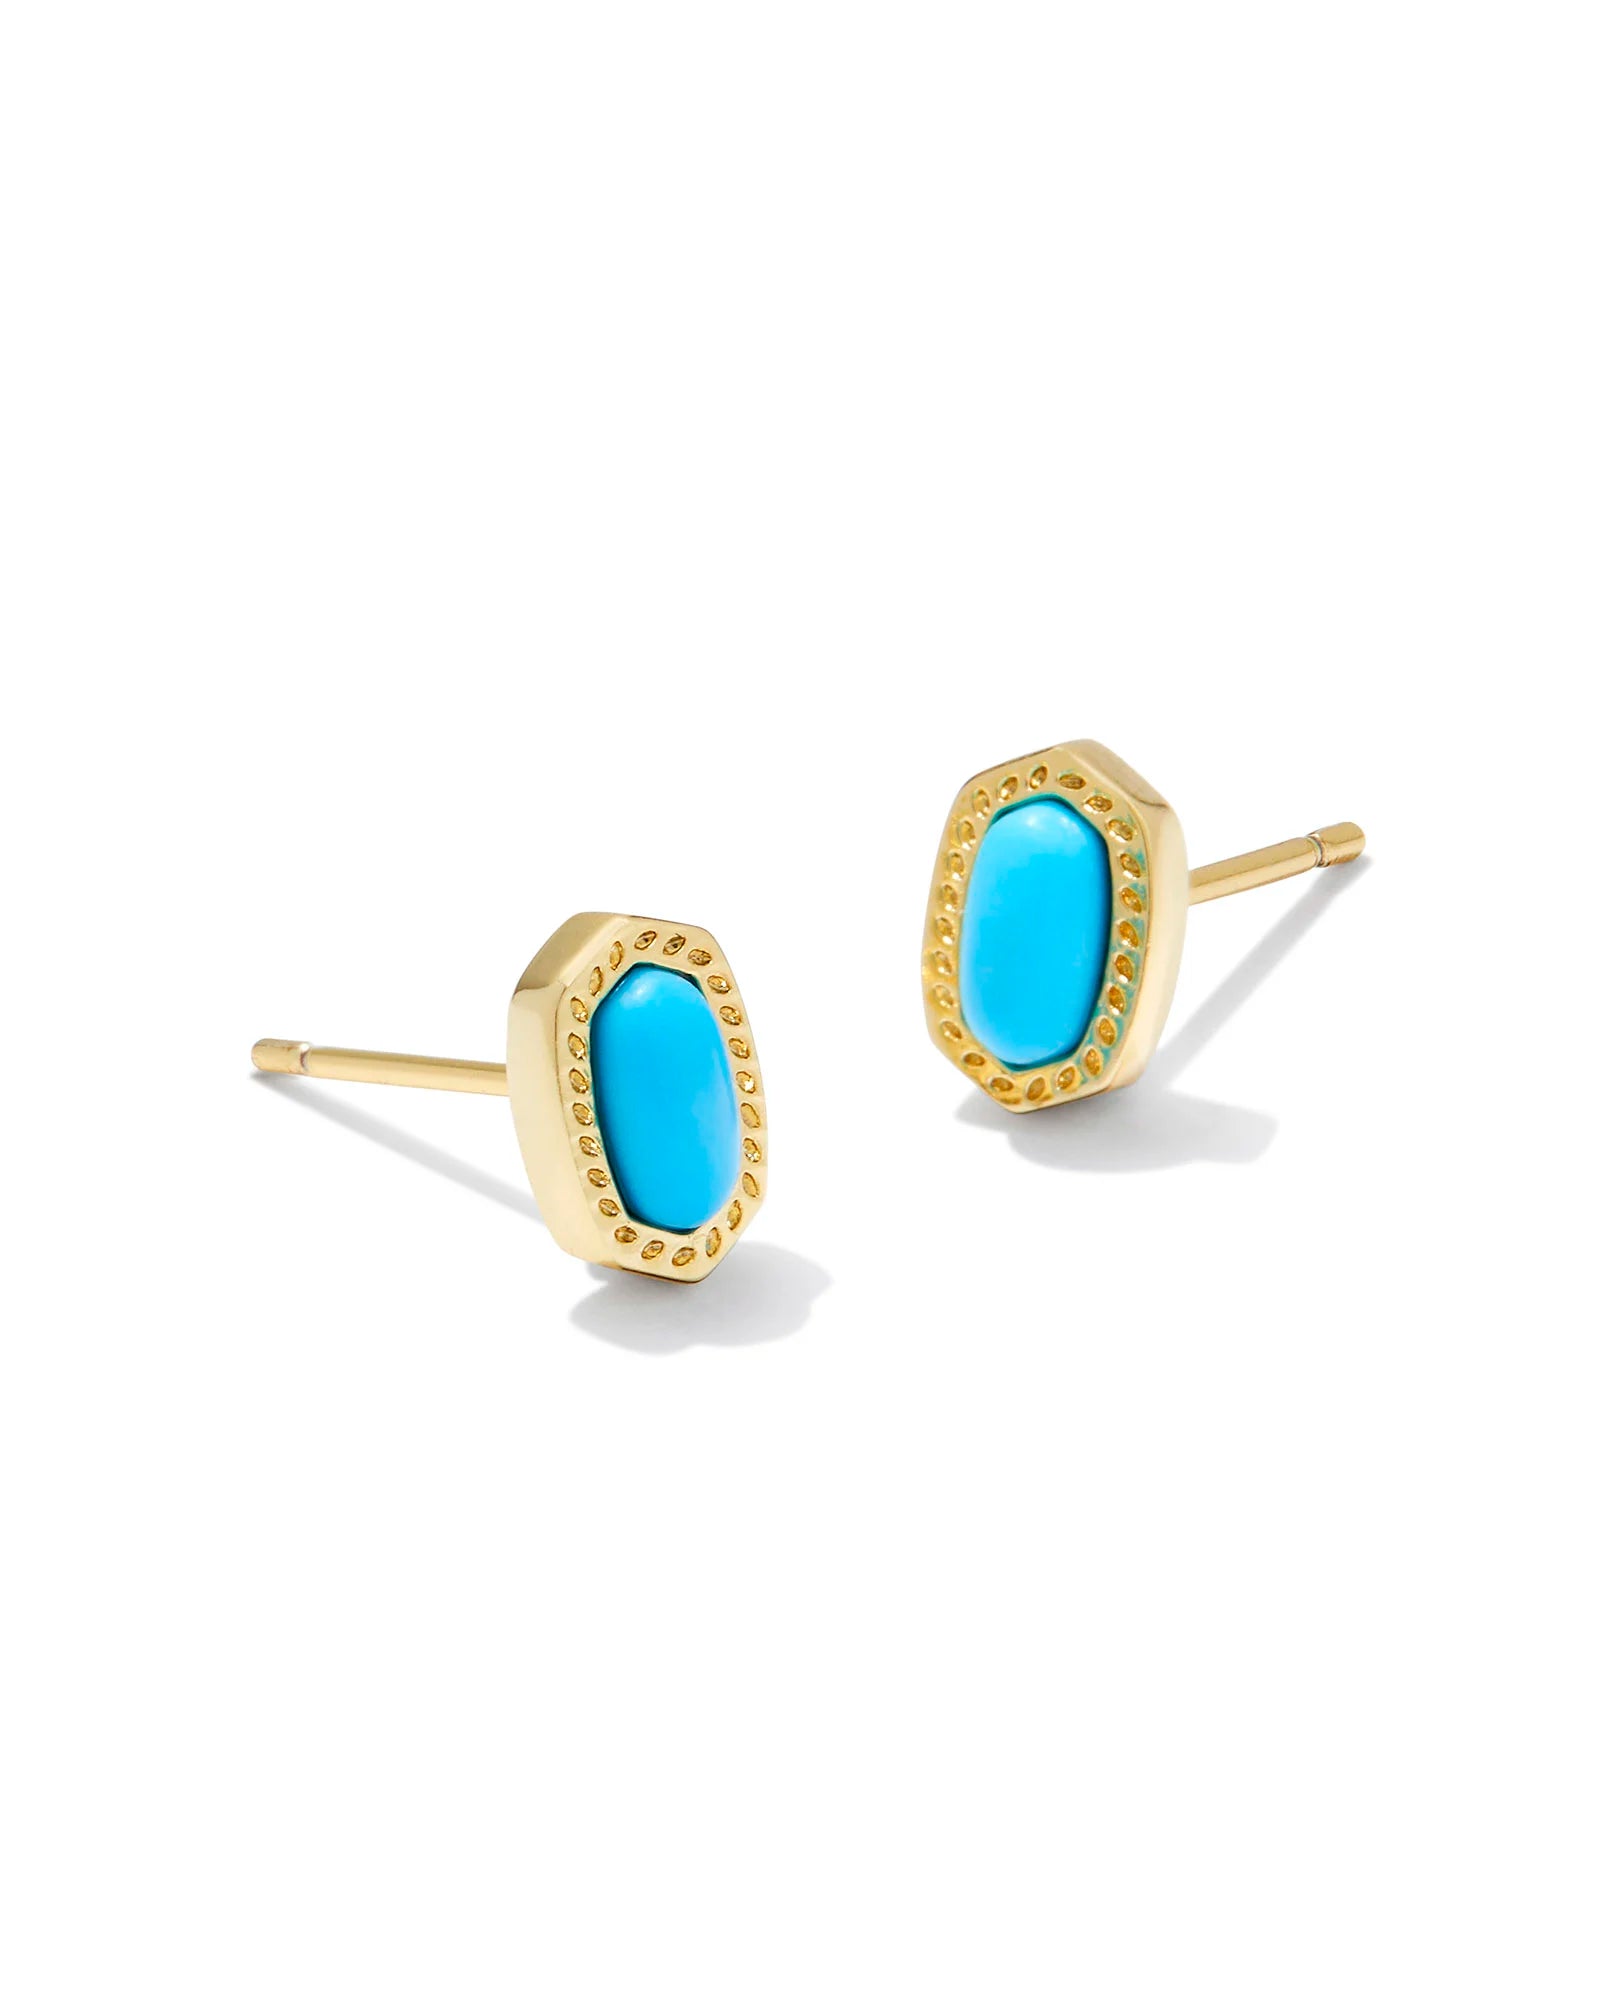 Kendra Scott | Mini Ellie Gold Stud Earrings in Turquoise Magnesite - Giddy Up Glamour Boutique